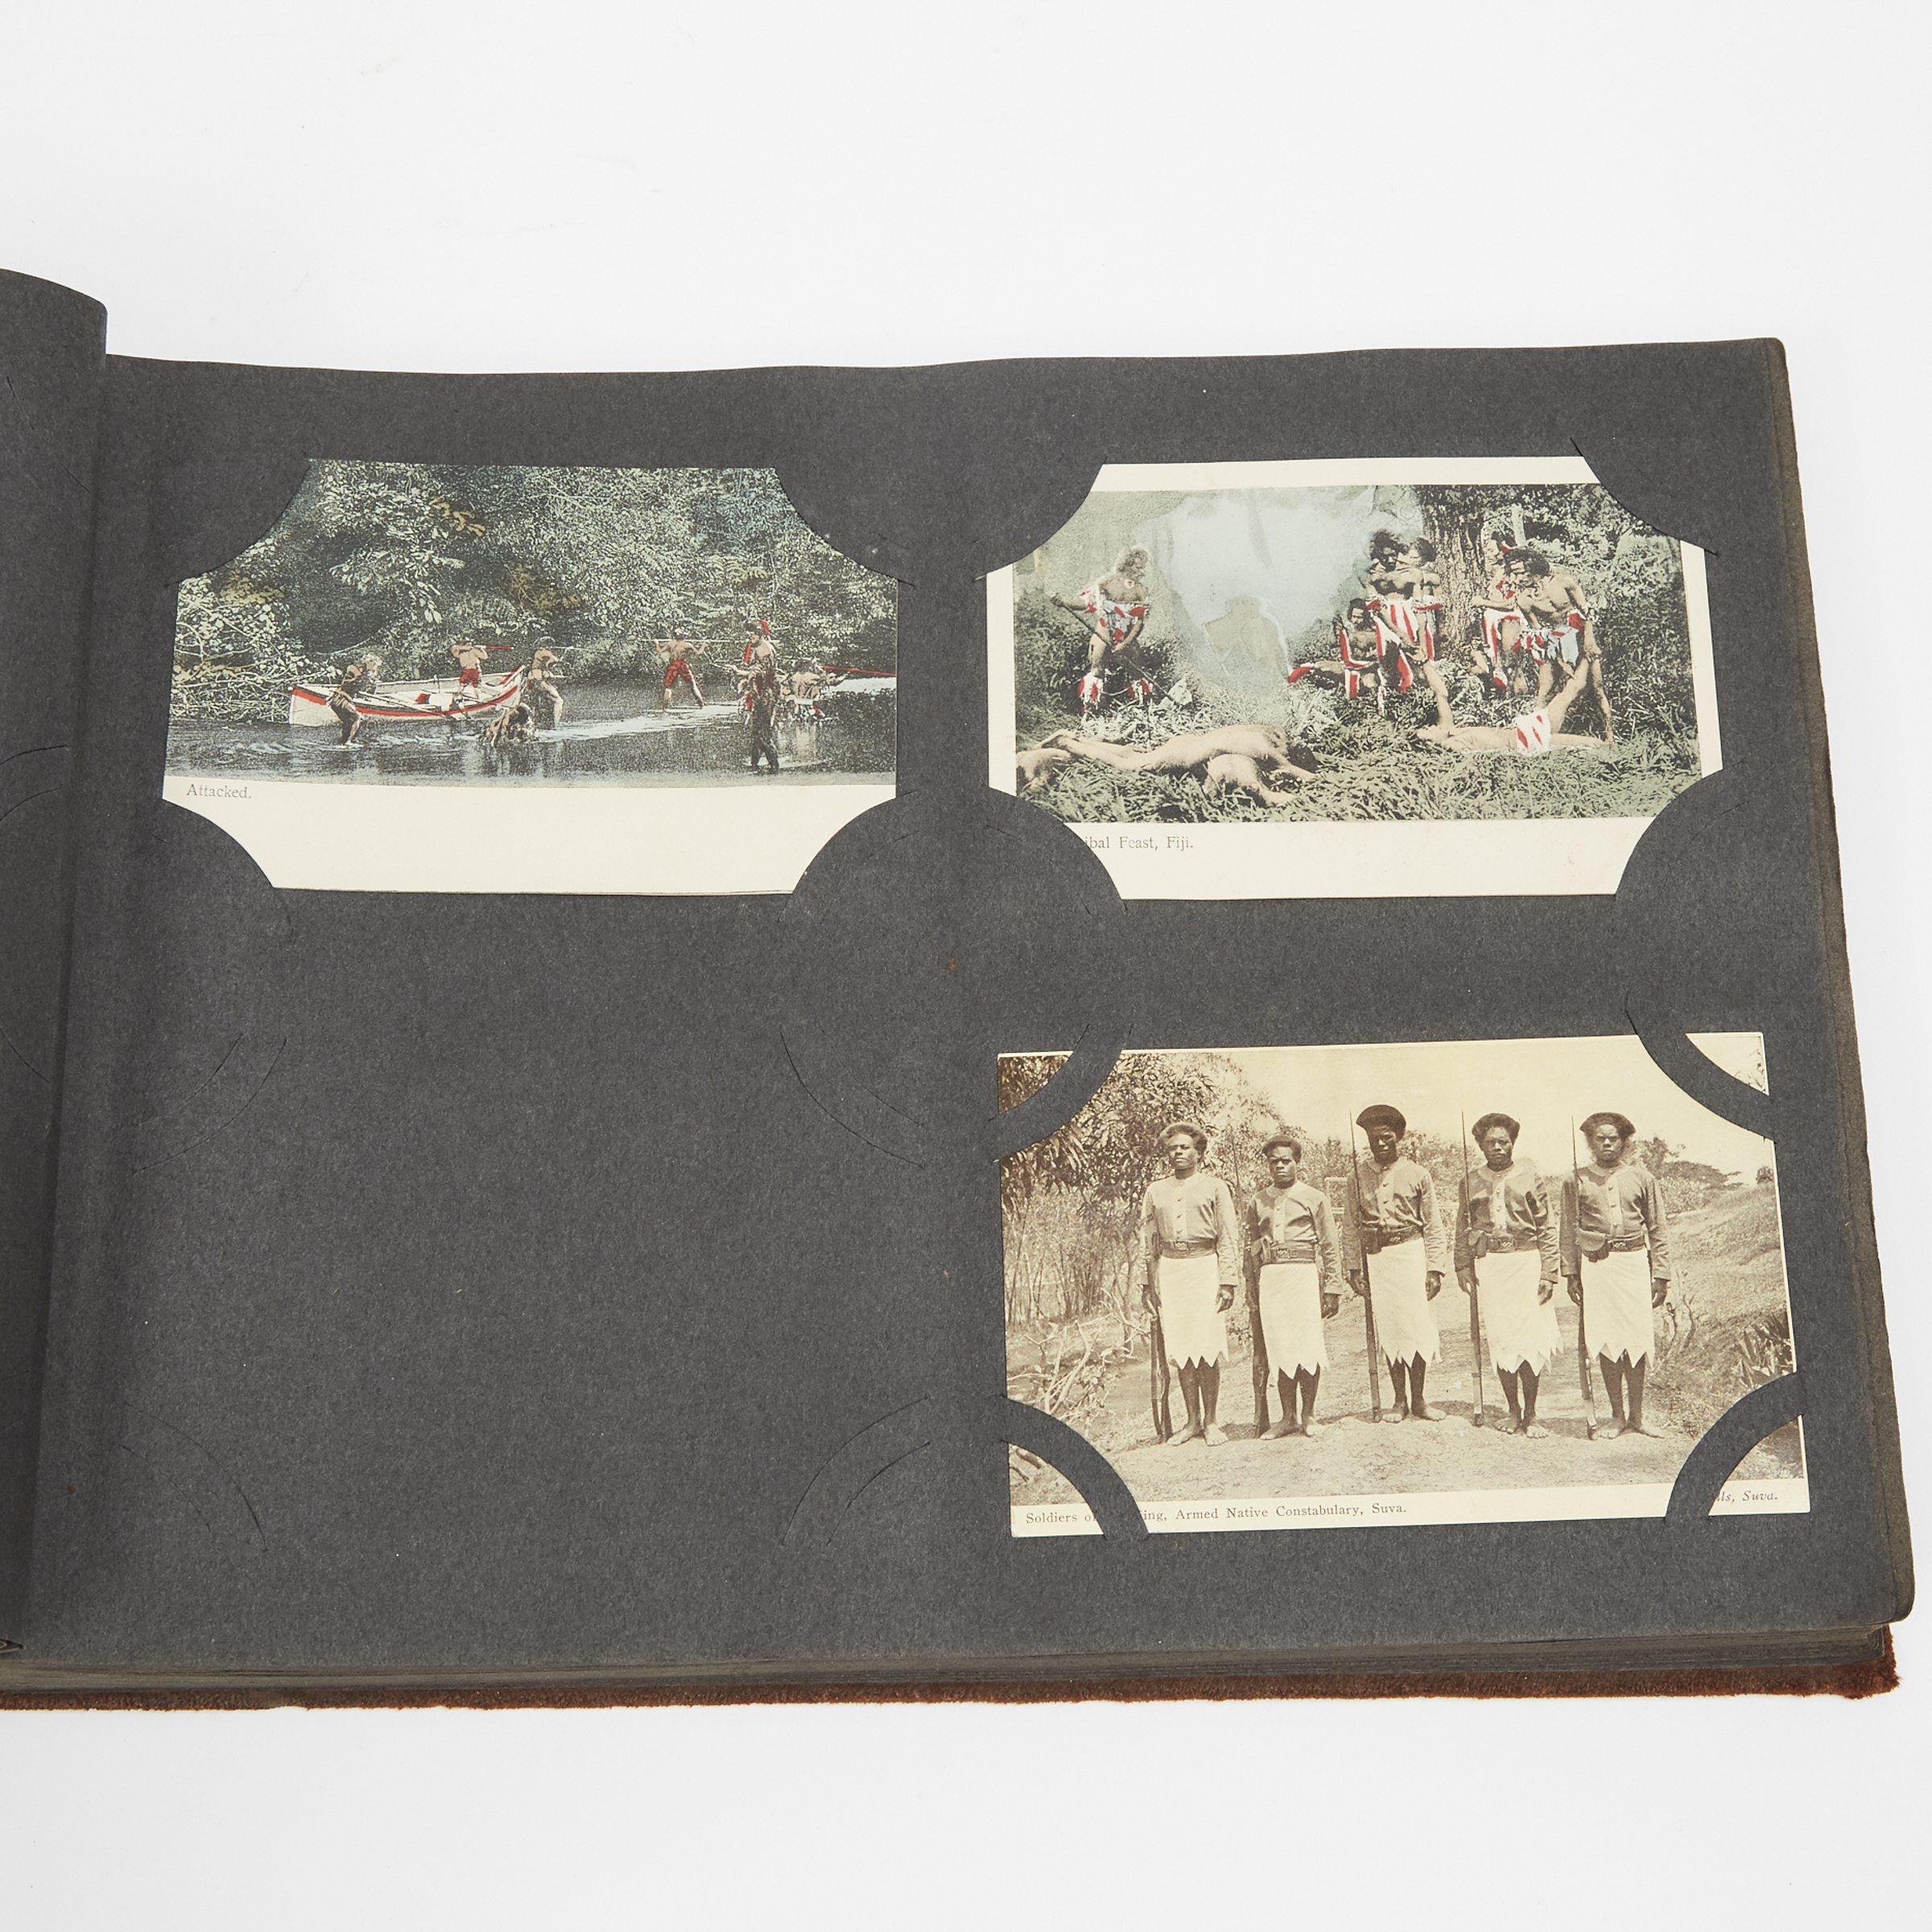 A Photo Album Containing Sixty-Seven Tinted Black and White Photograph Postcards of Japan and the World, Early 20th Century